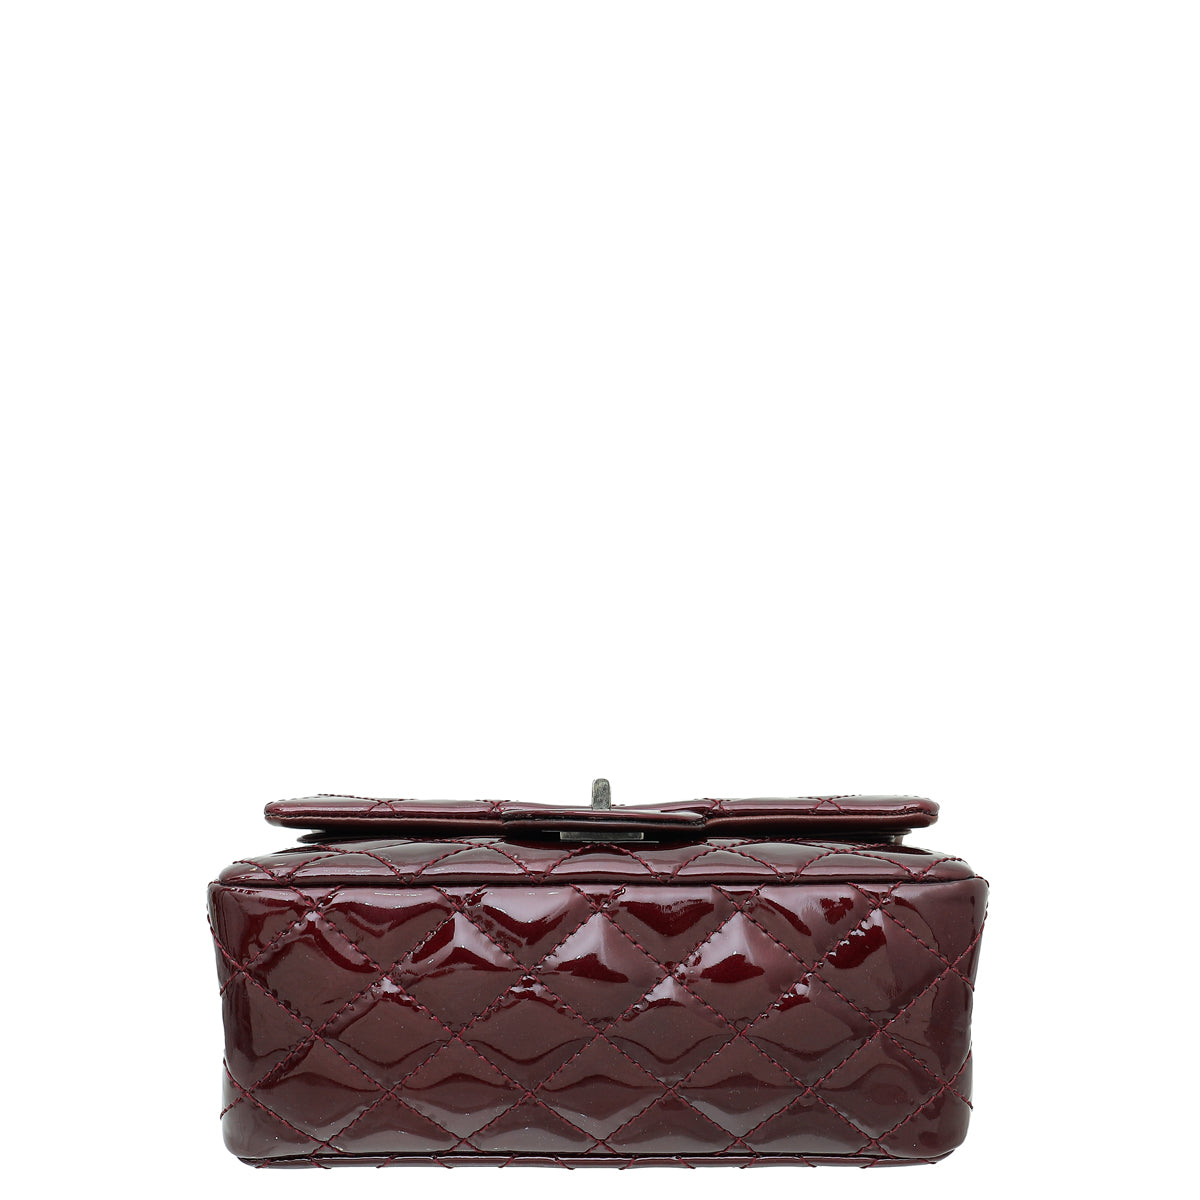 Chanel Burgundy Quilted Patent Leather Jumbo Classic Double Flap Bag Chanel